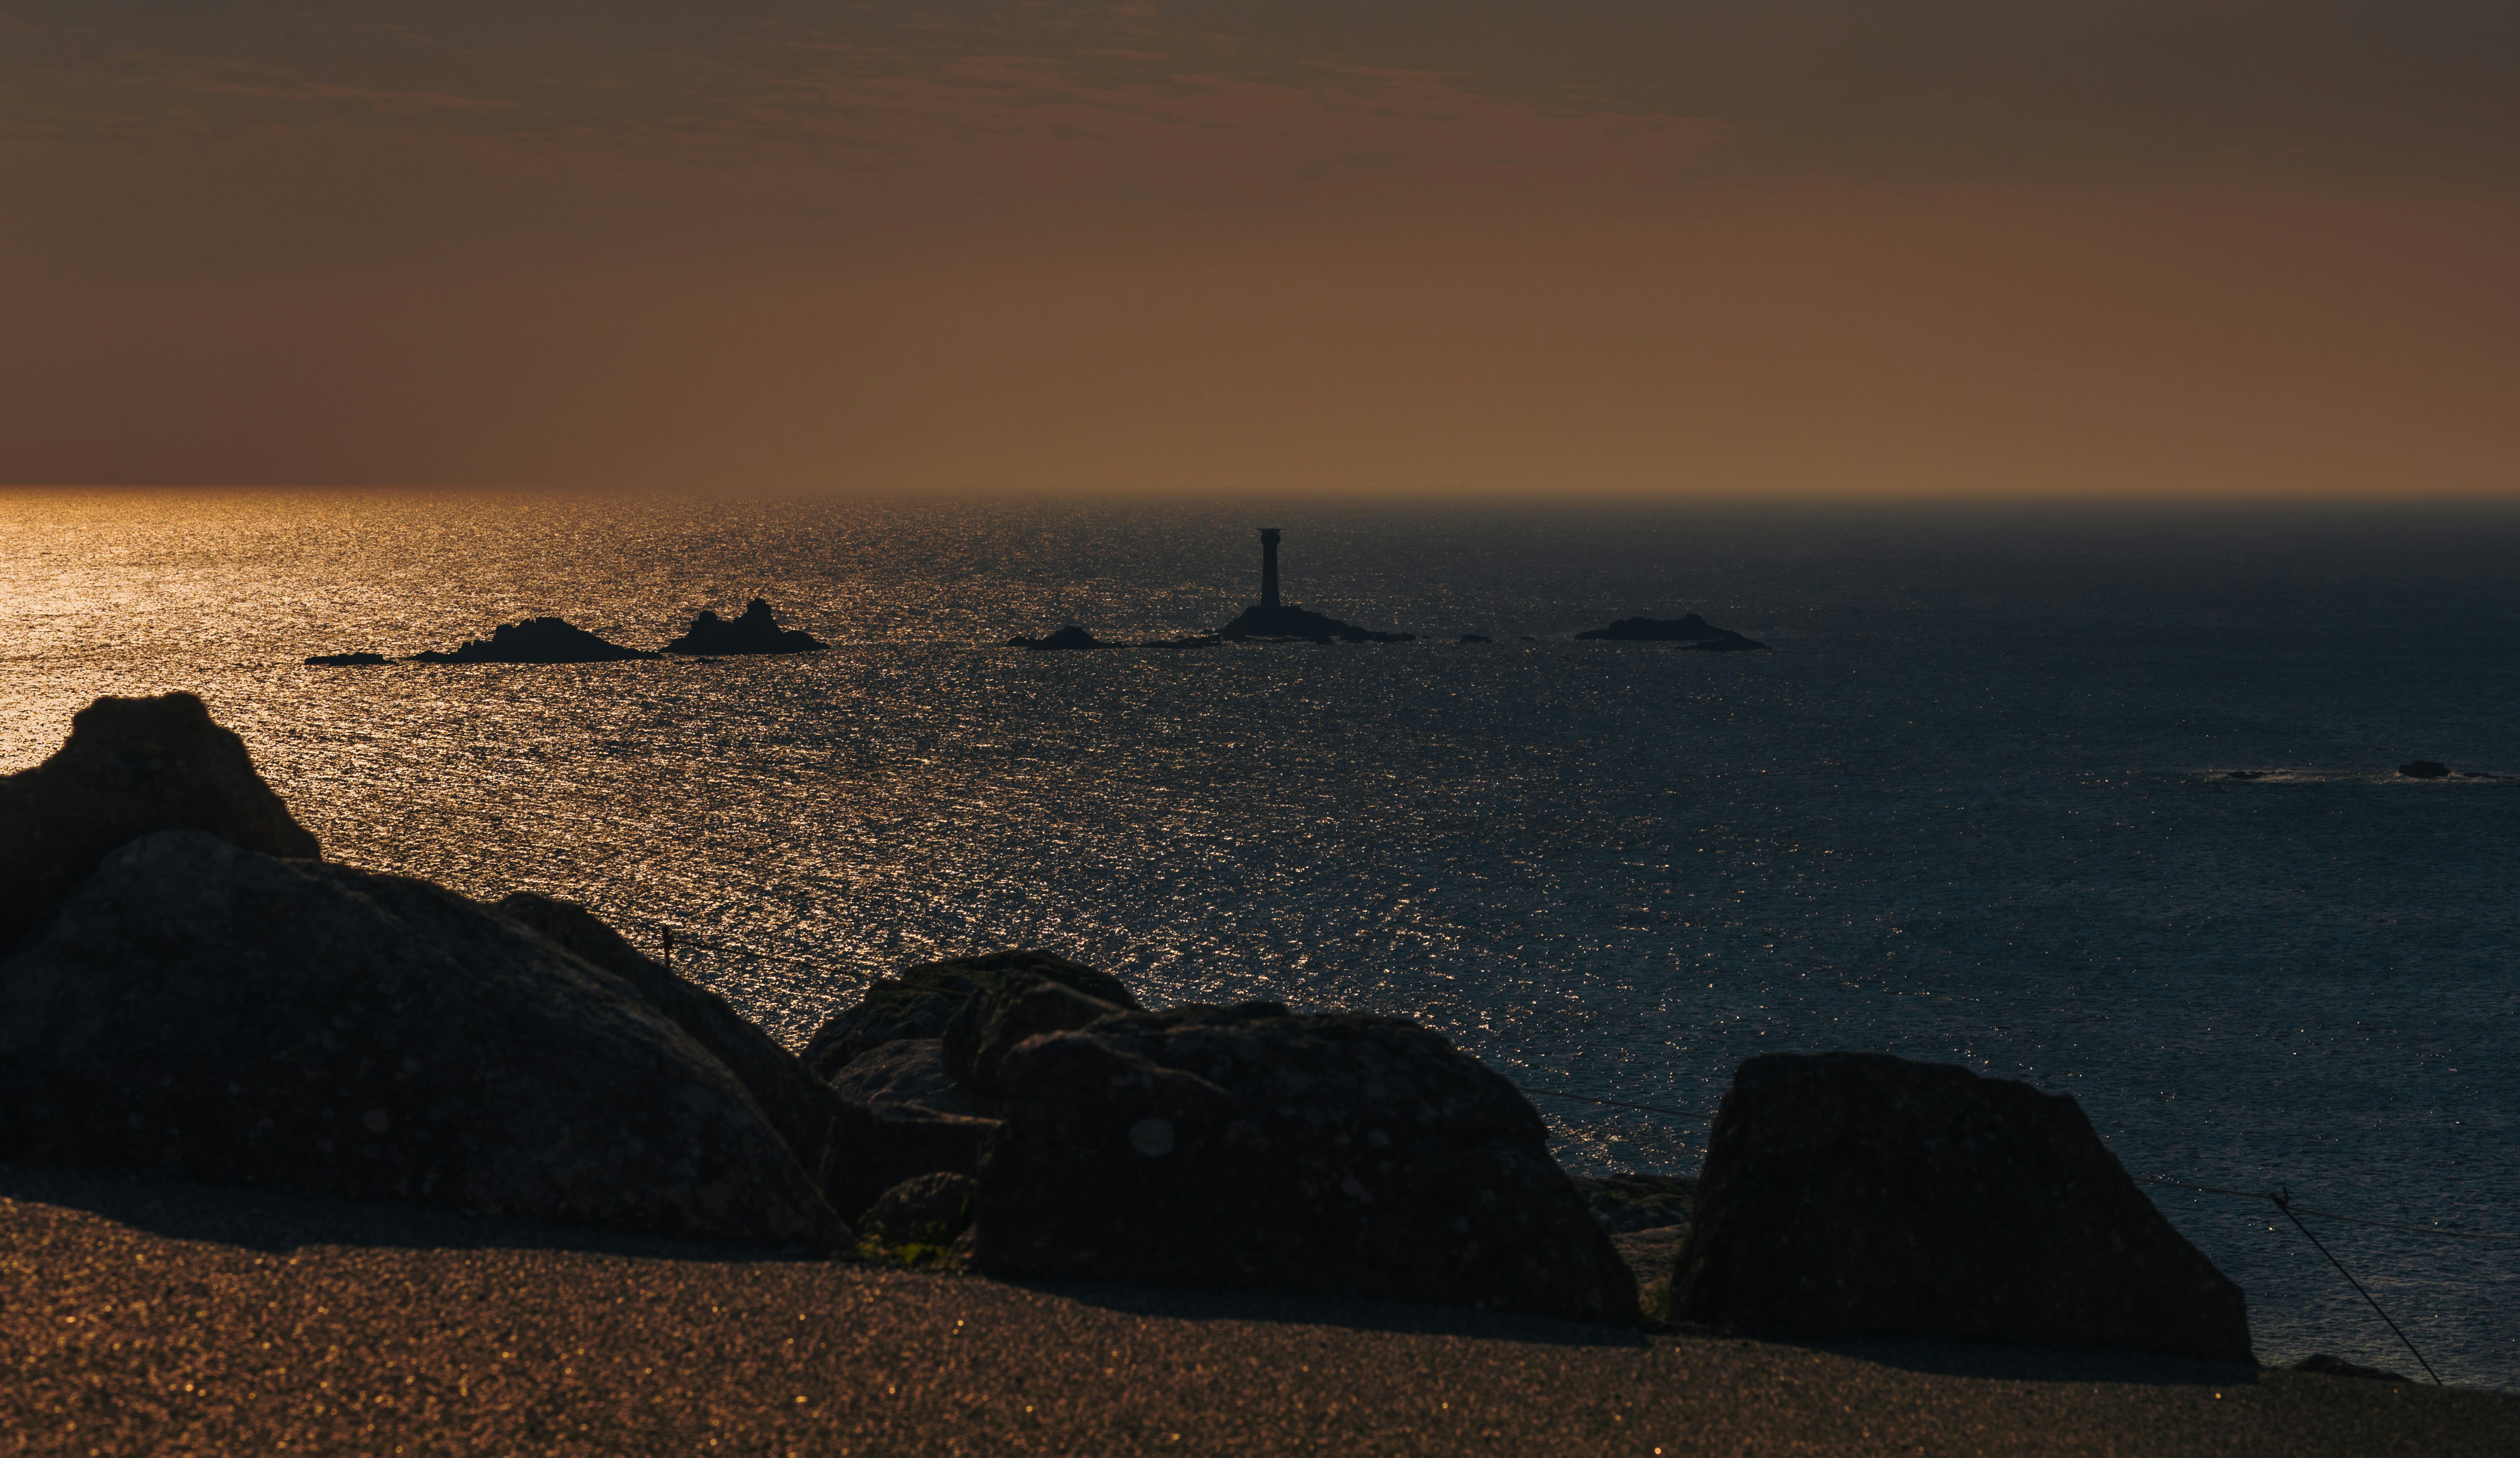 A view out to sea from Land's End, mainland Britain's most south-westerly point and one of the country's most famous landmarks.